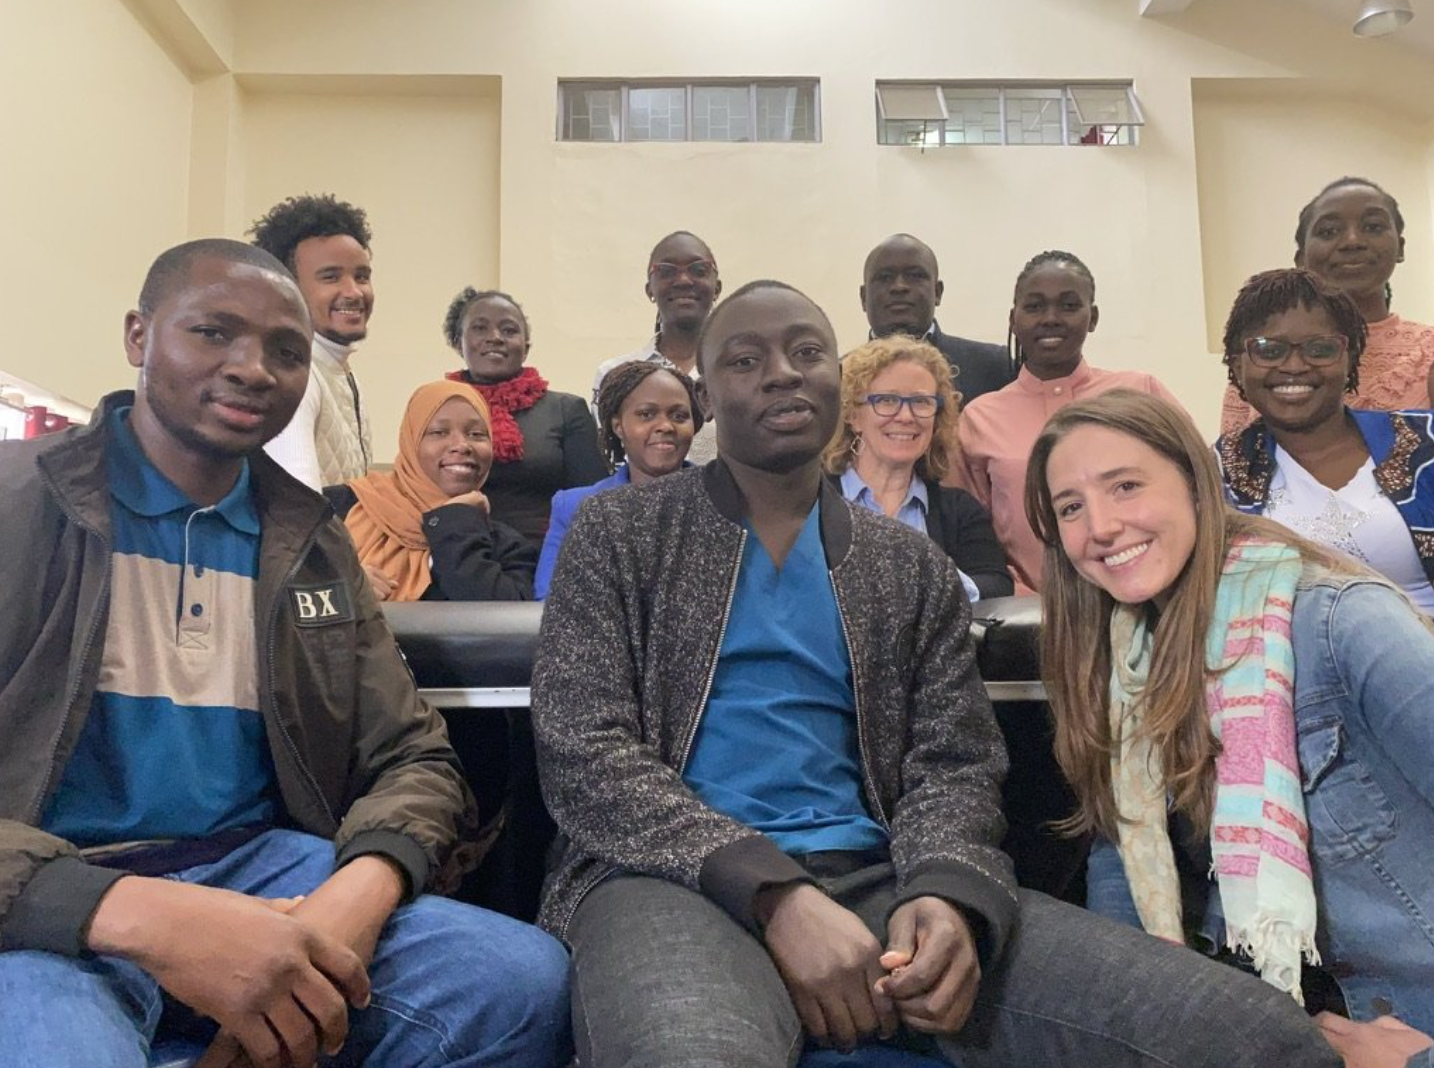 Jillian Caster, DPT ’08 (front right), and Associate Professor Michelle “Missy” Criss (middle row, second from right) pose with physiotherapists they taught in Nairobi, Kenya. (Photo courtesy of Michelle Criss) 